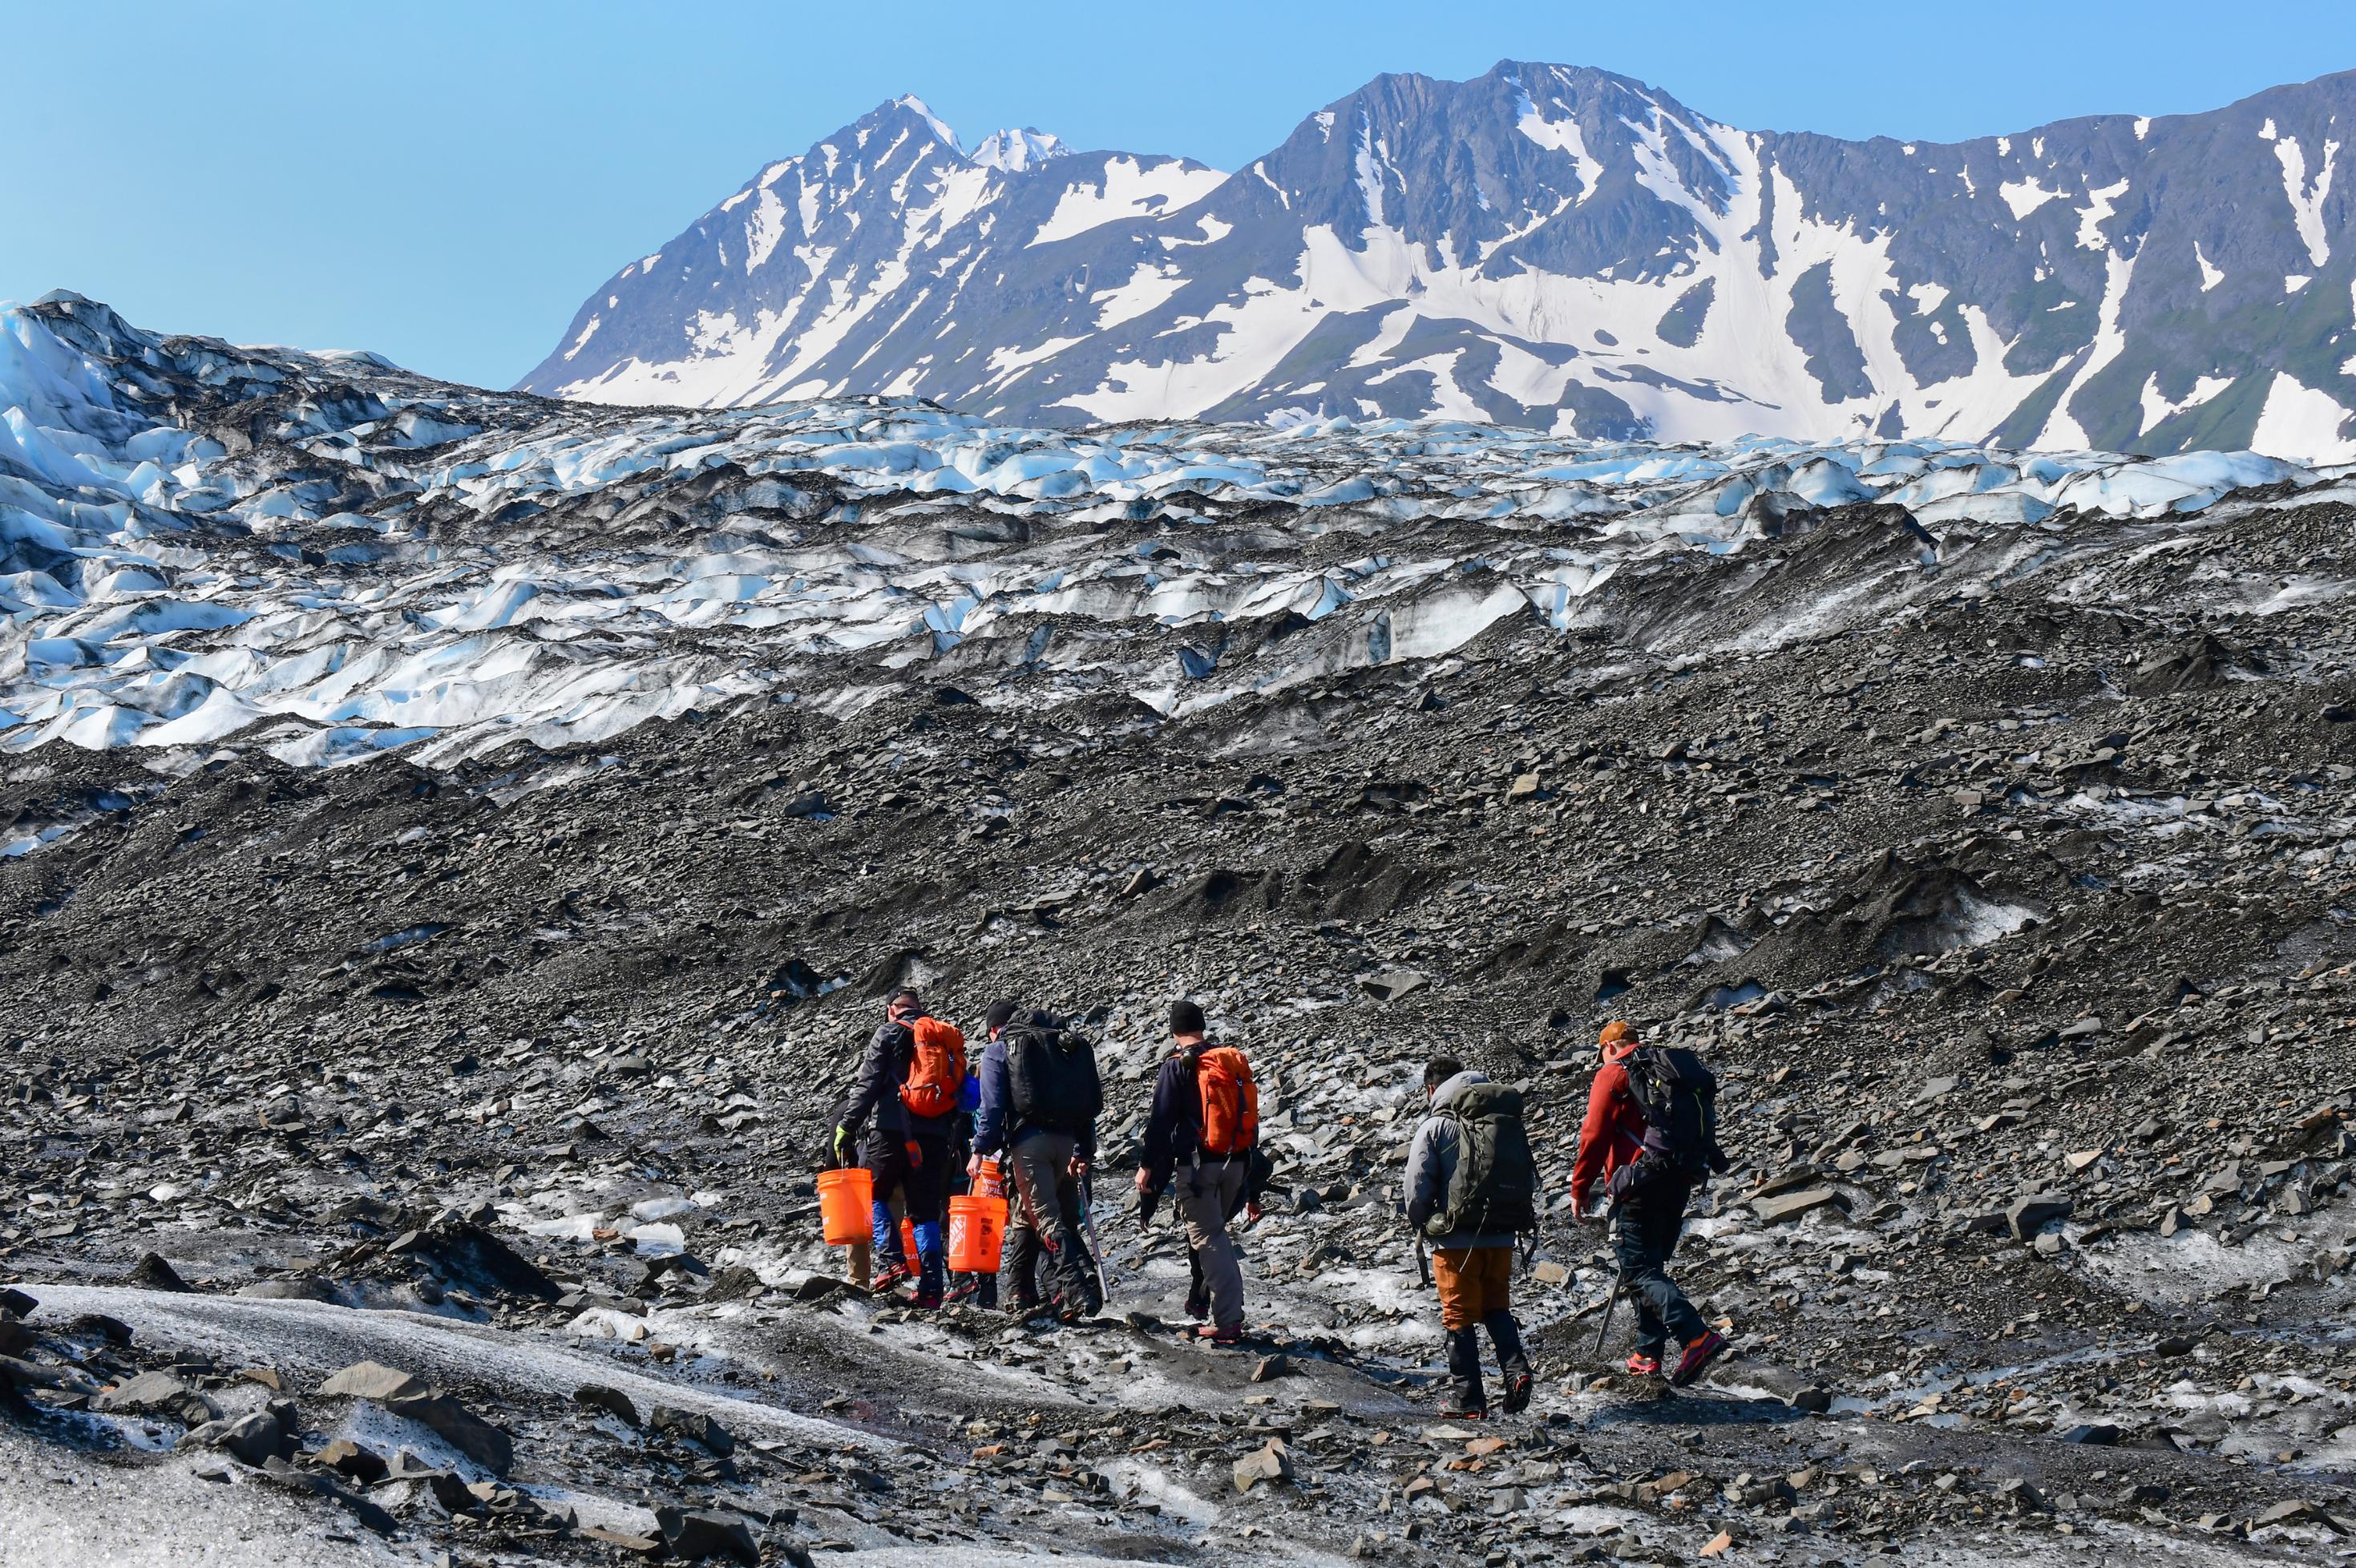 Military and civilian searchers hike across Colony Glacier June 13, 2022, to reach the remnants of a military plane crash. The team is working to recover the remains of 52 passengers and crewmembers, and wreckage of an Air Force C-124 Globemaster aircraft that crashed Nov. 22, 1952